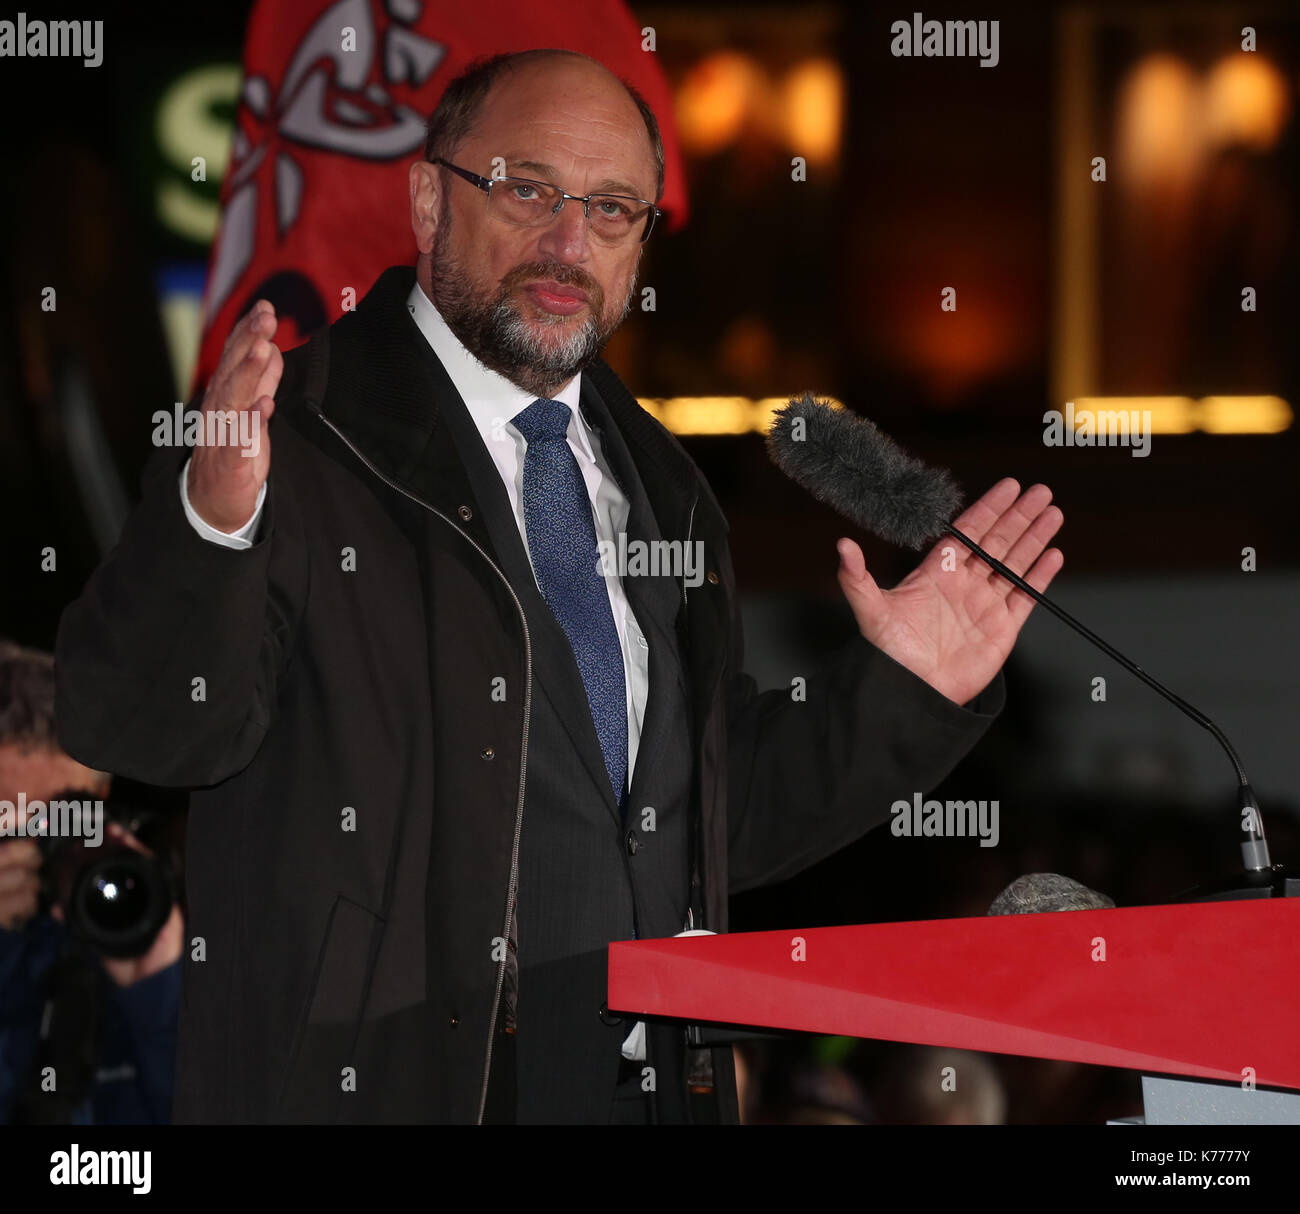 Munich, Germany. 14th Sep, 2017. SPD top candidate Martin Schulz came to Munich to speak to the people. Credit: Alexander Pohl/Pacific Press/Alamy Live News Stock Photo